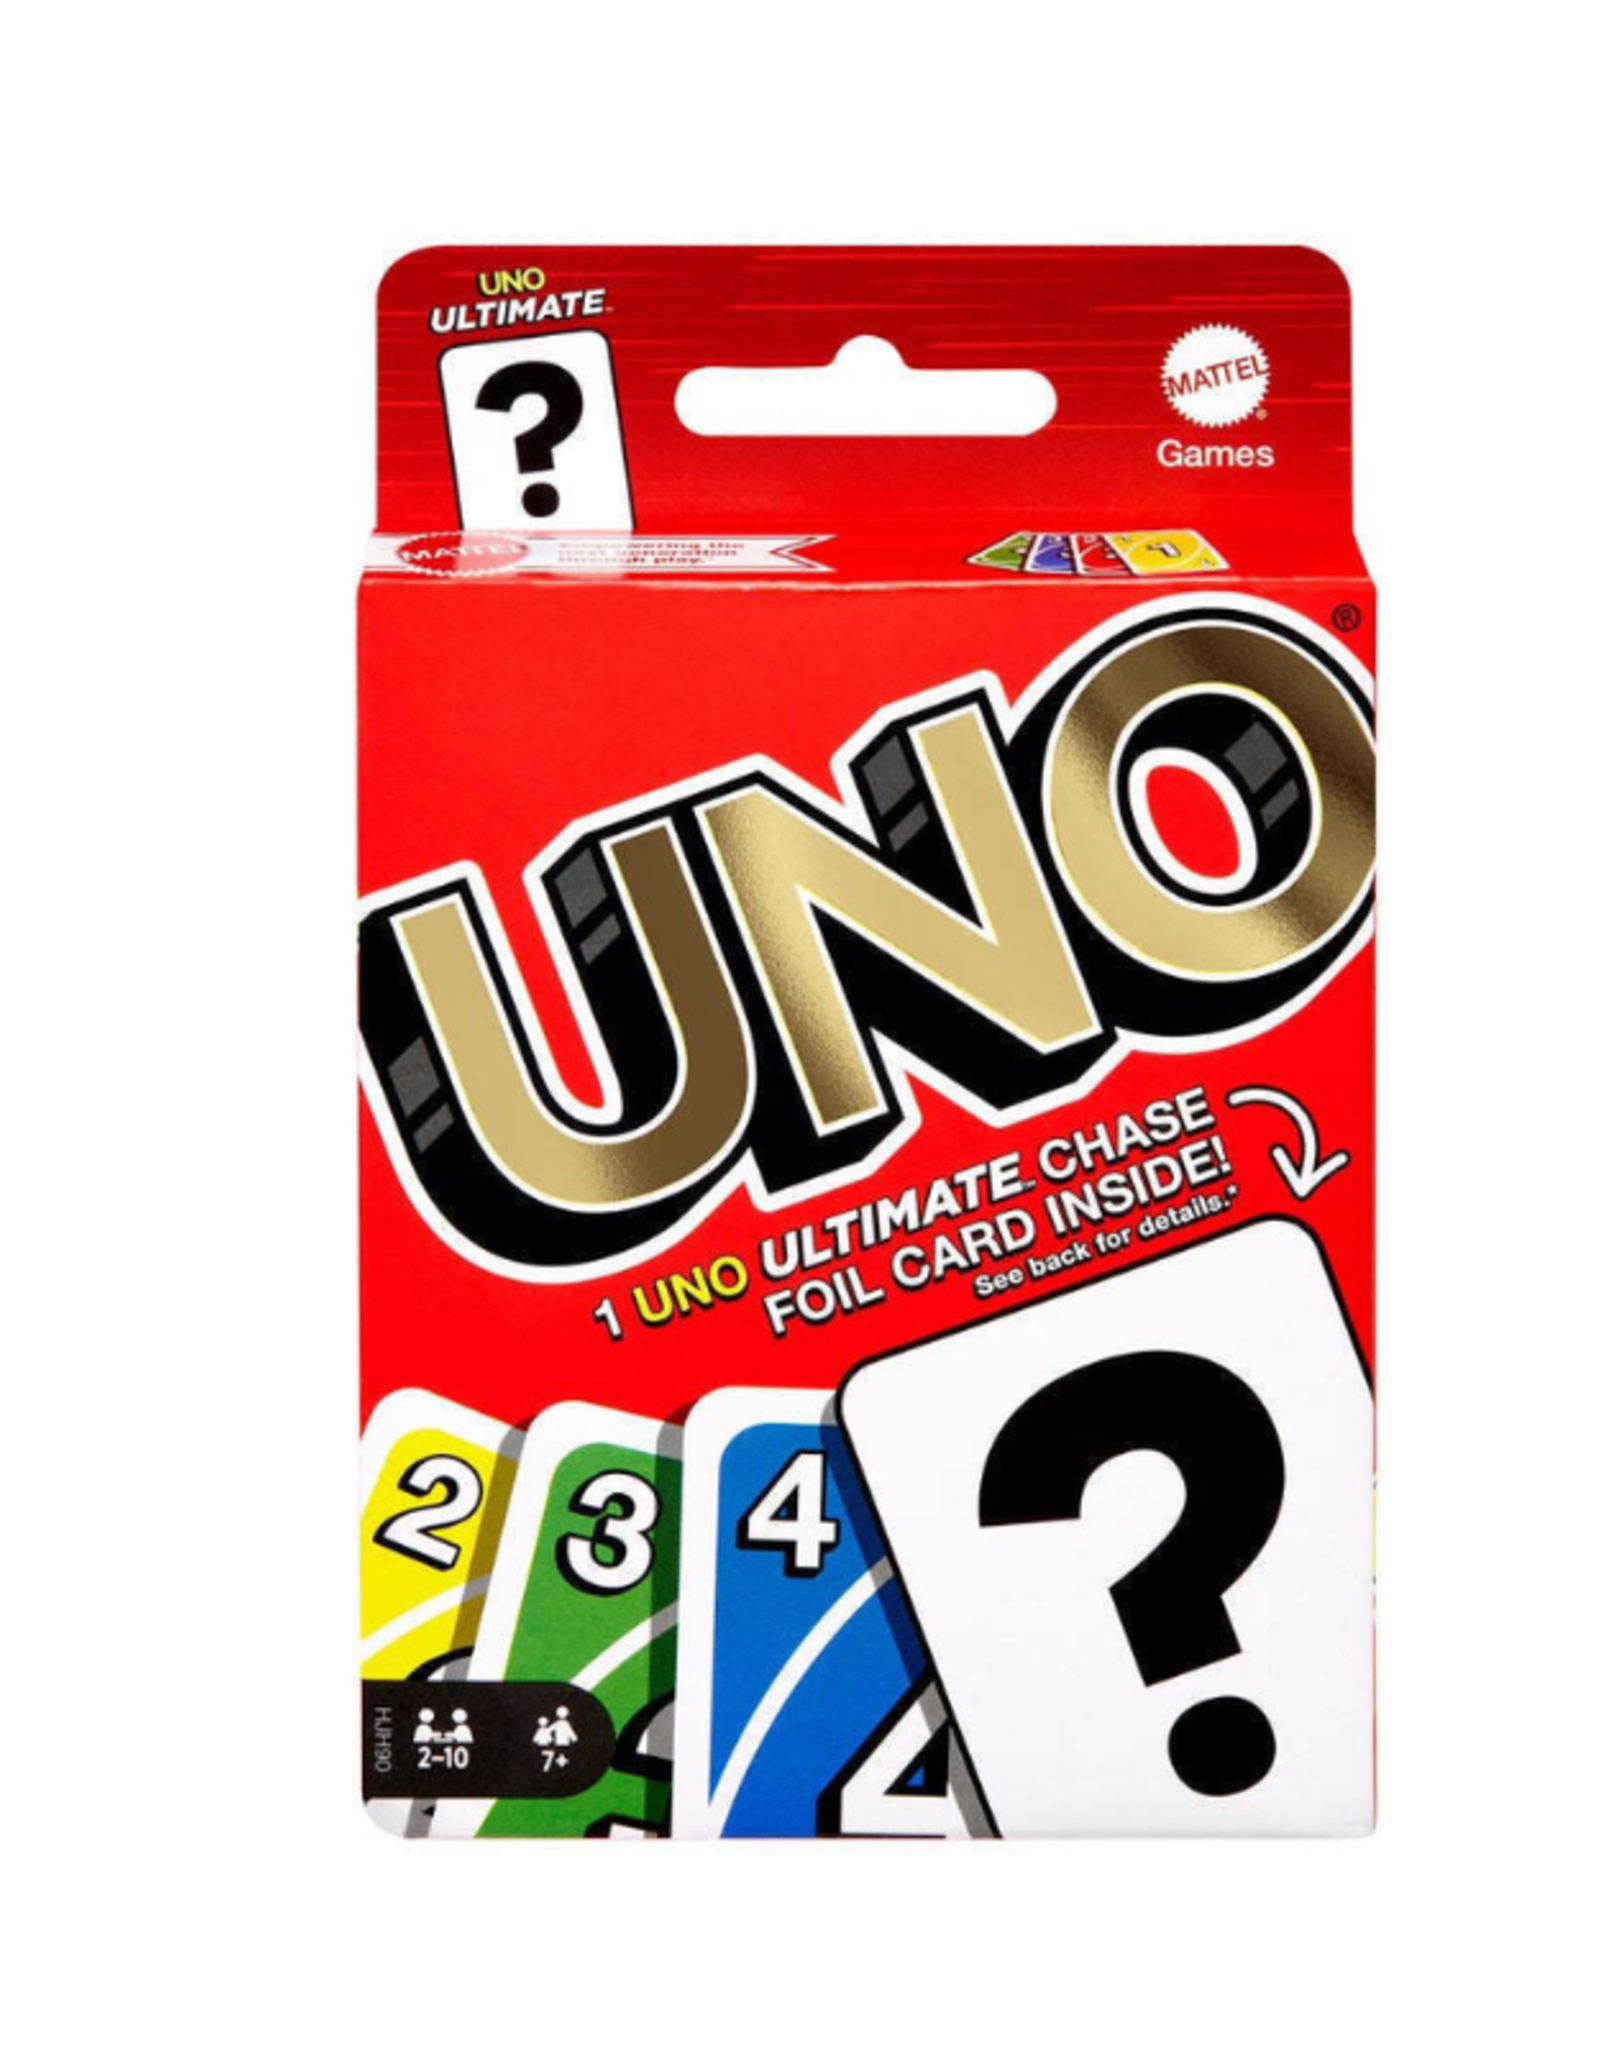 UNO with Marvel Ultimate Foil Card